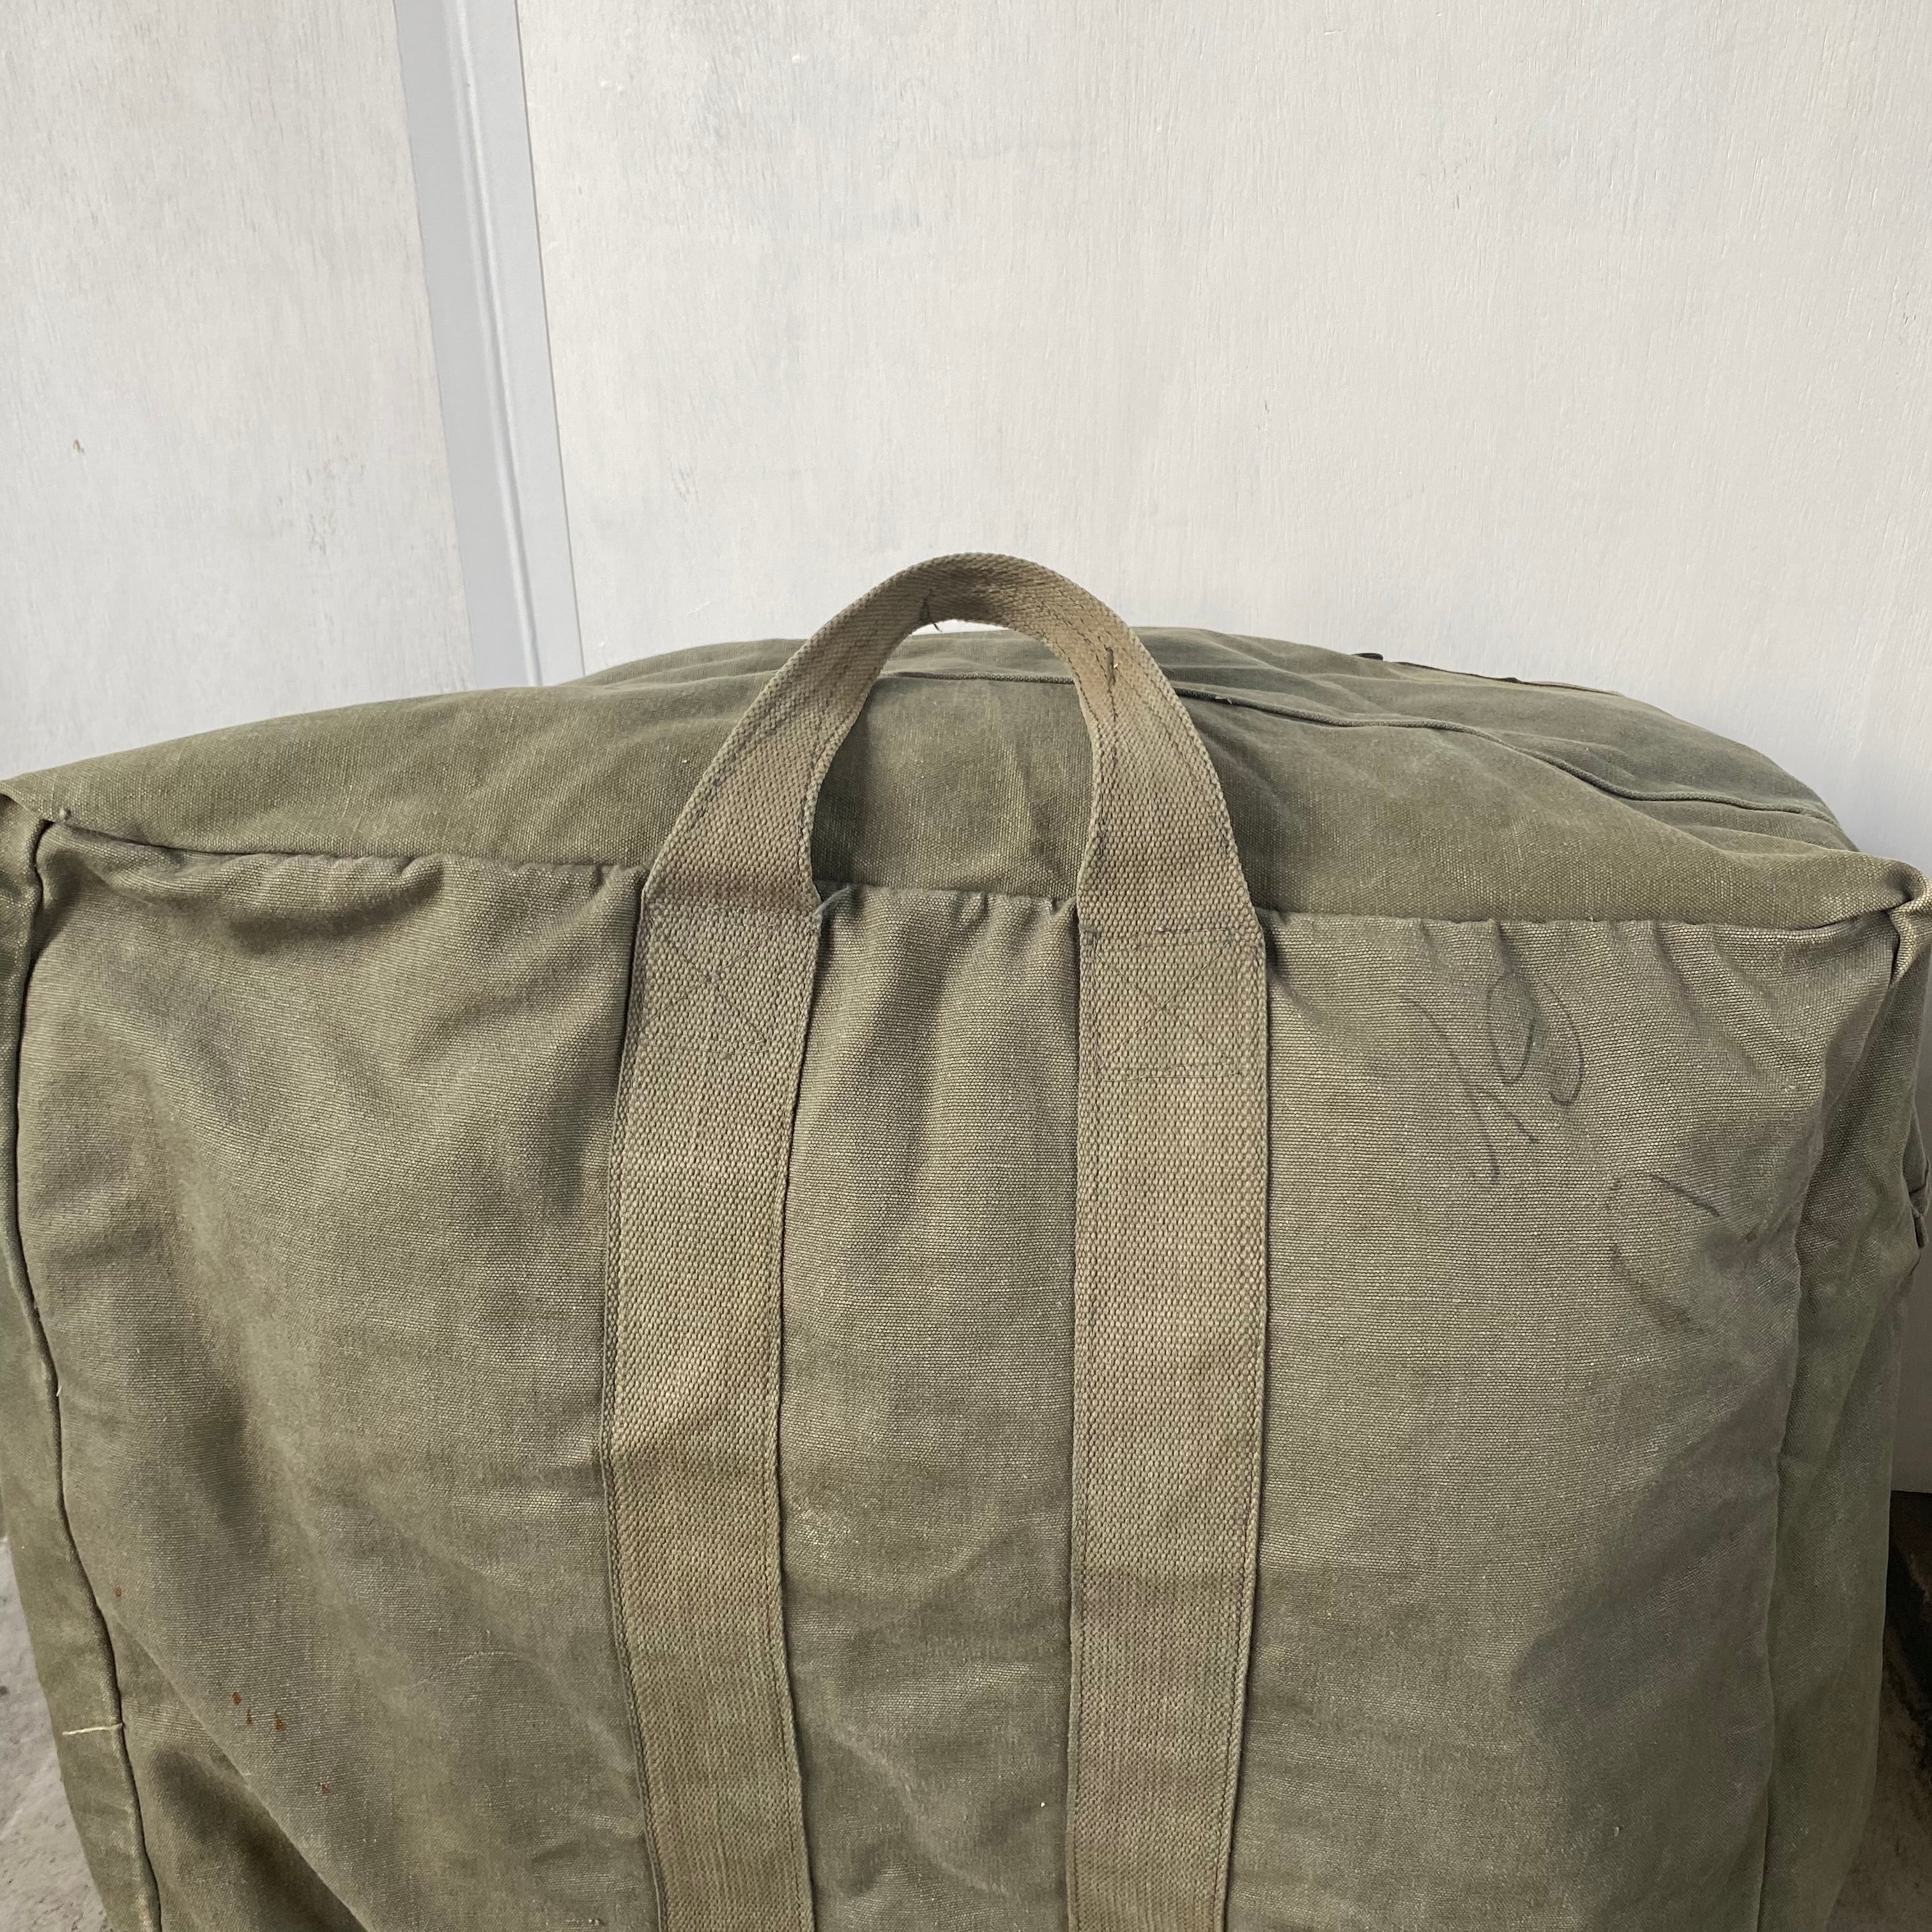 US ARMED FORCES PERSONAL EFFECTS BAG / Mr.Clean Select